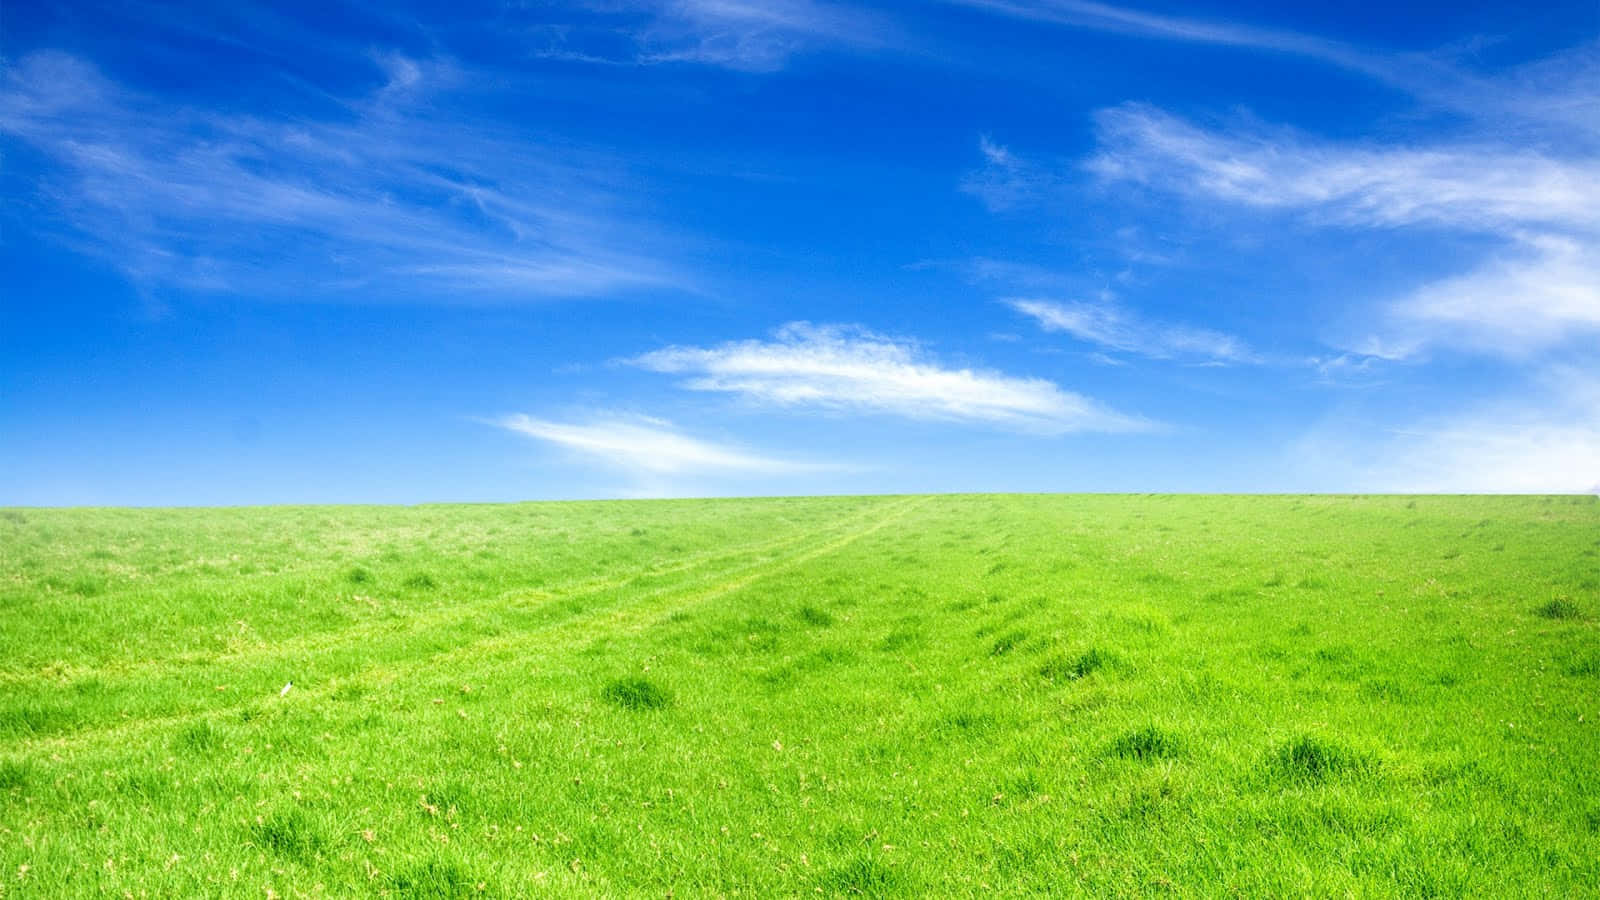 Expand your boundaries with a stunning grassy background